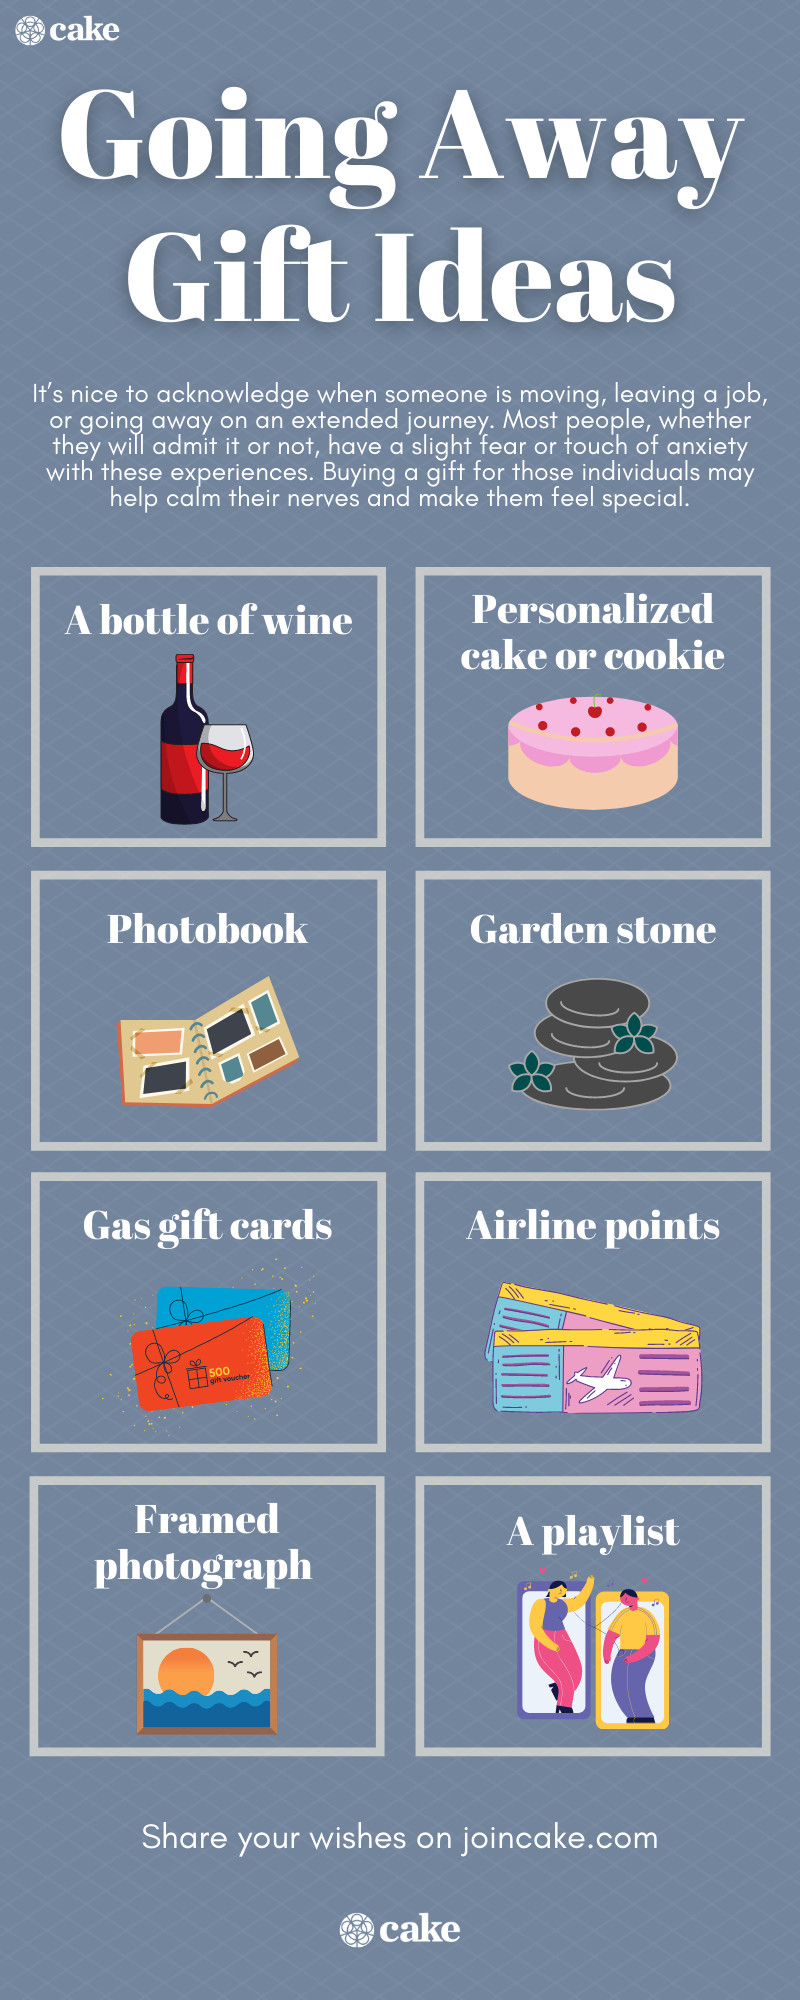 infographic of going away gift ideas